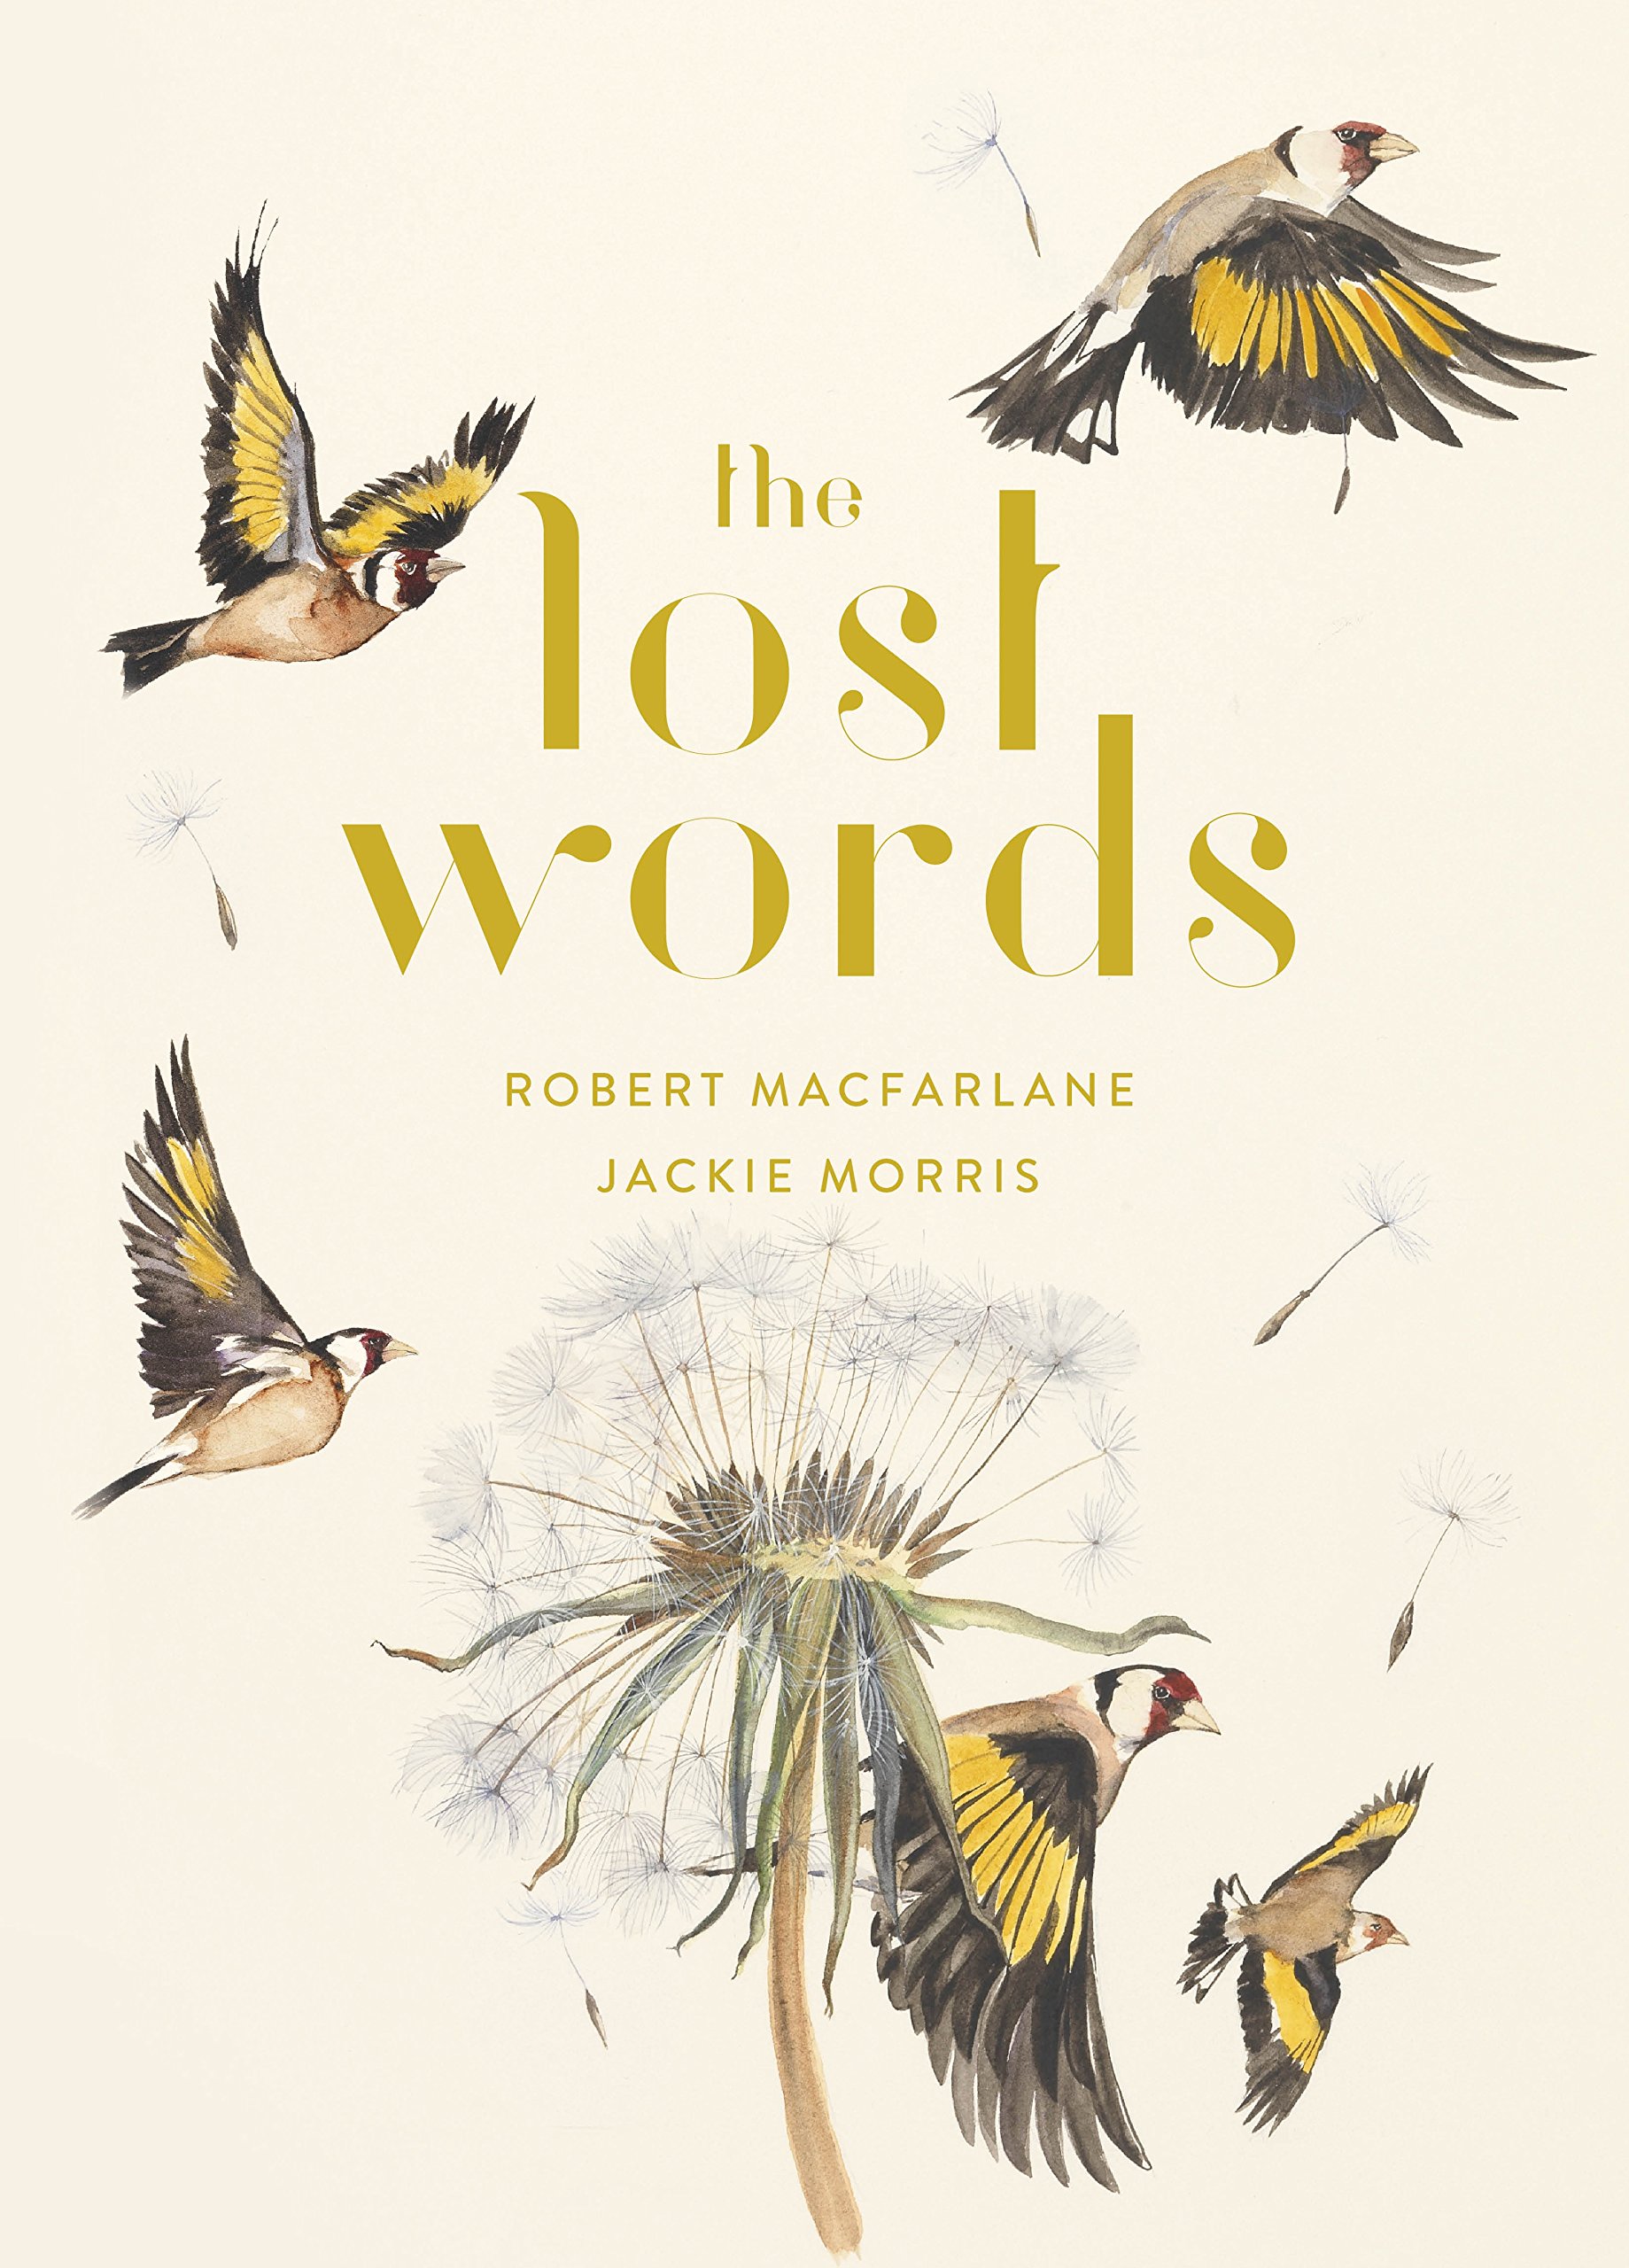 The Lost Words written by Robert Macfarlane and illustrated by Jackie Morris